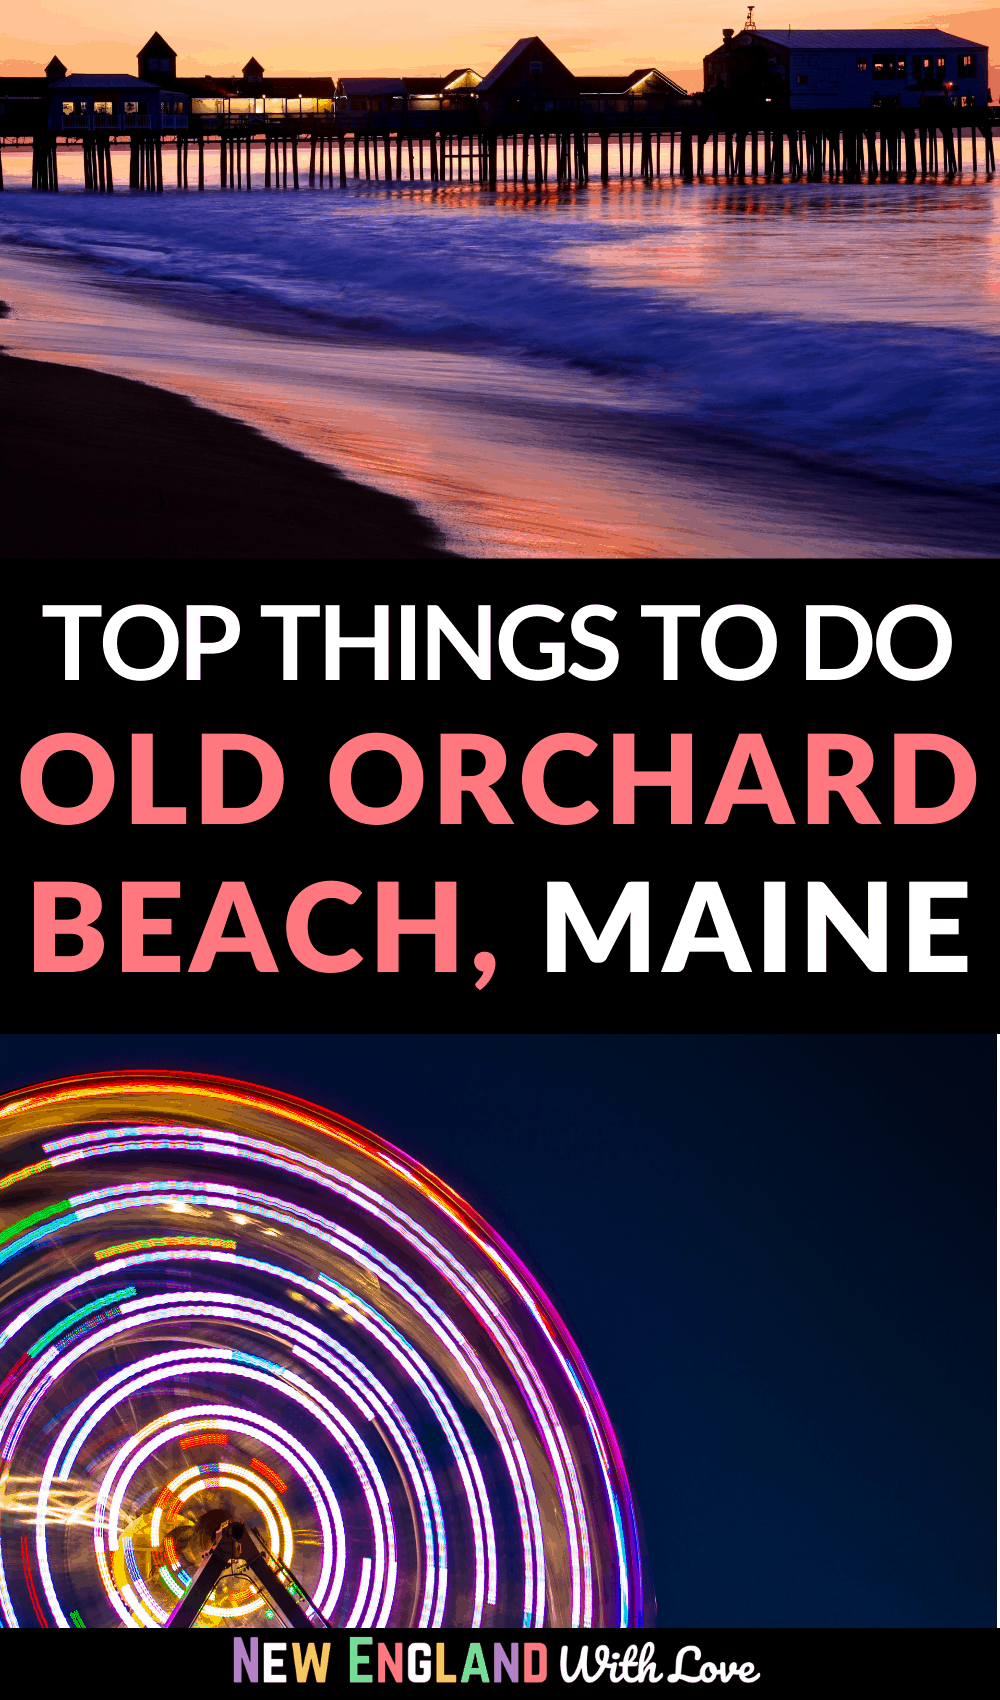 Pinterest graphic reading "TOP THINGS TO DO OLD ORCHARD BEACH MAINE"